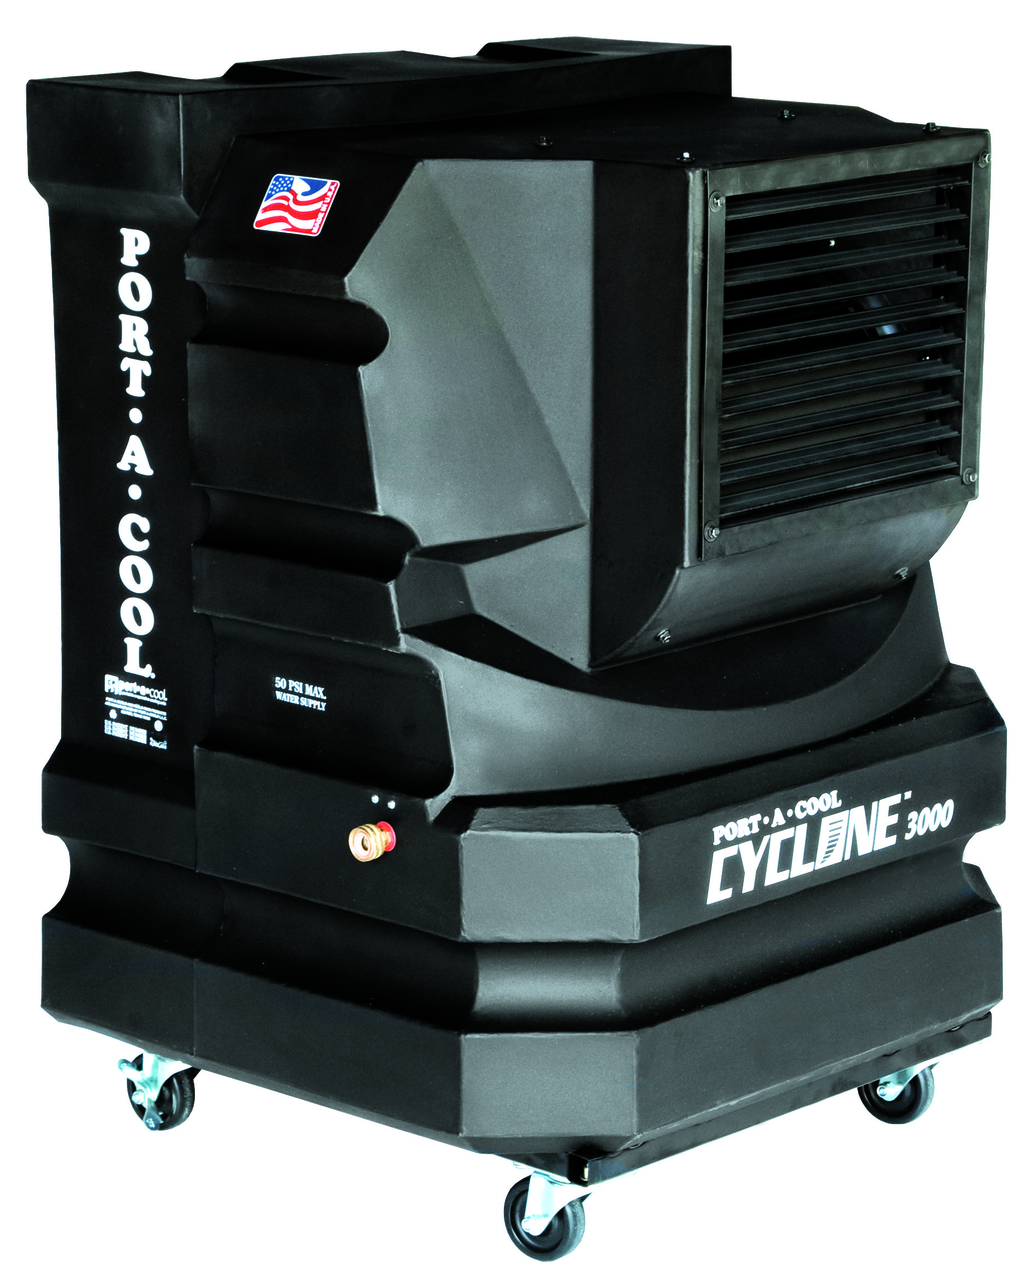 Port-A-Cool Cyclone 3000 Portable Evaporative Cooler - PAC2KCYC01